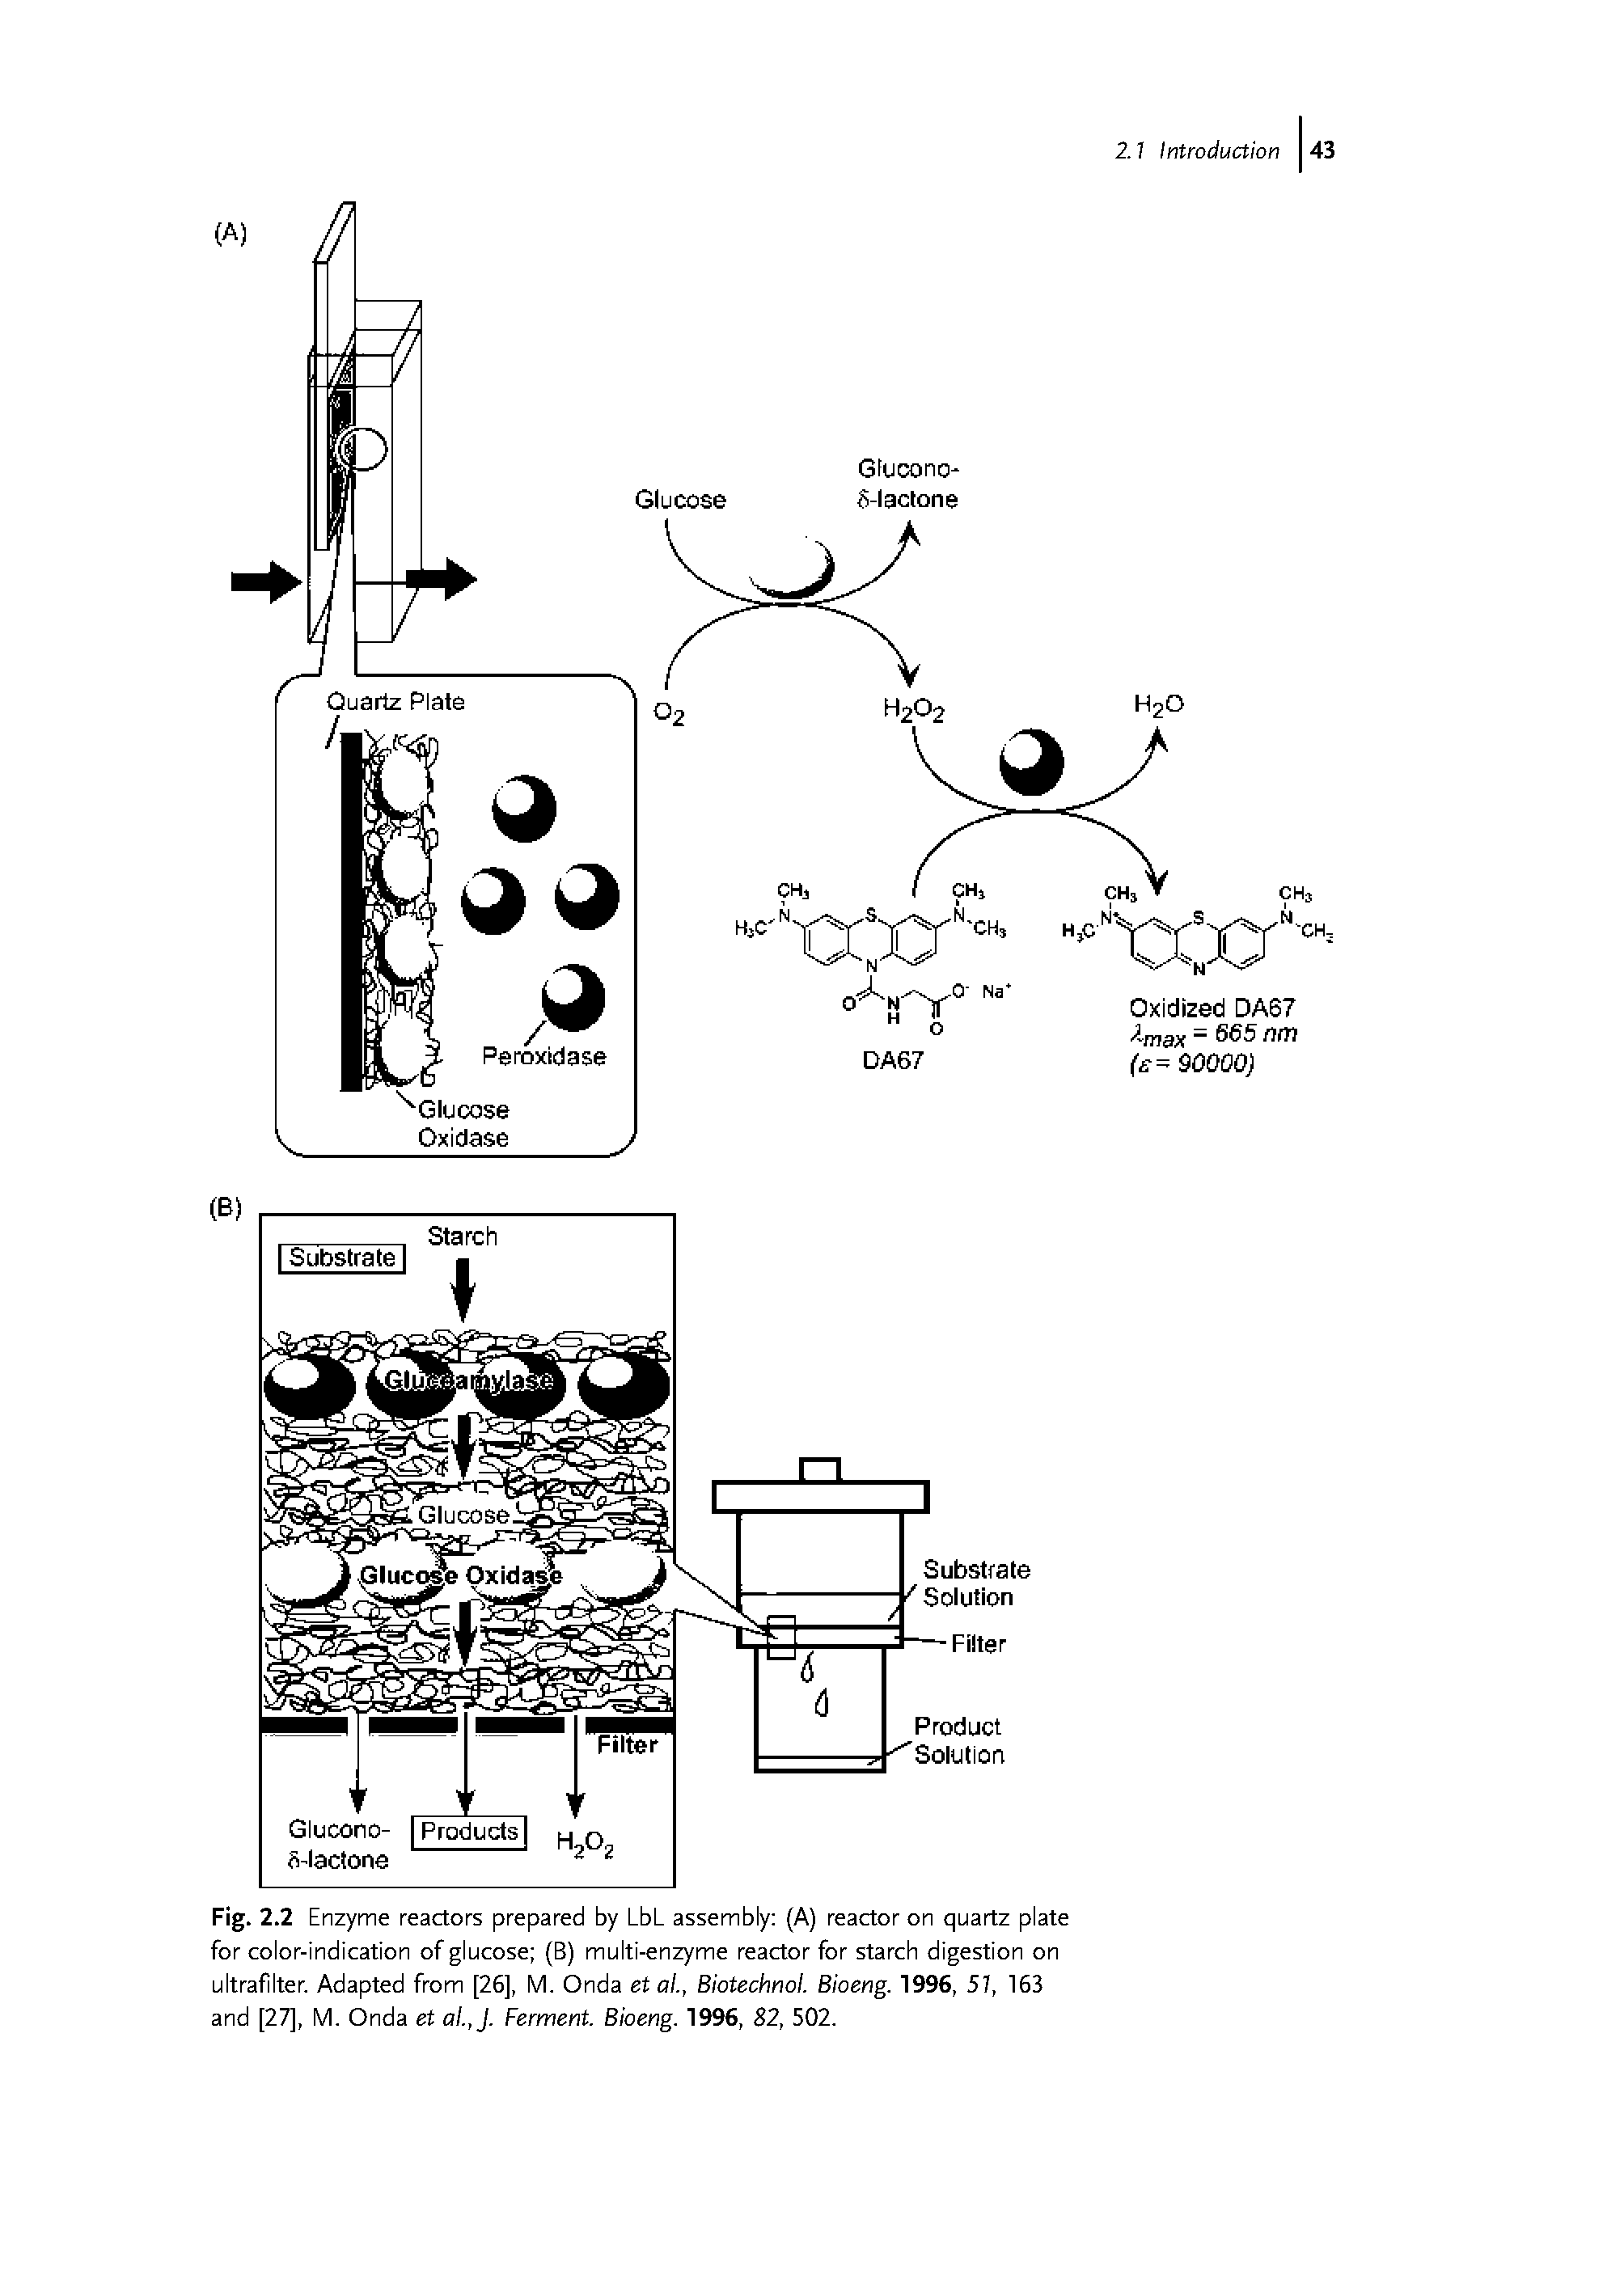 Fig. 2.2 Enzyme reactors prepared by LbL assembly (A) reactor on quartz plate for color-indication of glucose (B) multi-enzyme reactor for starch digestion on ultrafilter. Adapted from [26], M. Onda etal, Biotechnol. Bioeng. 1996, 57, 163 and [27], M. Onda et al.,J. Ferment. Bioeng. 1996, 82, 502.